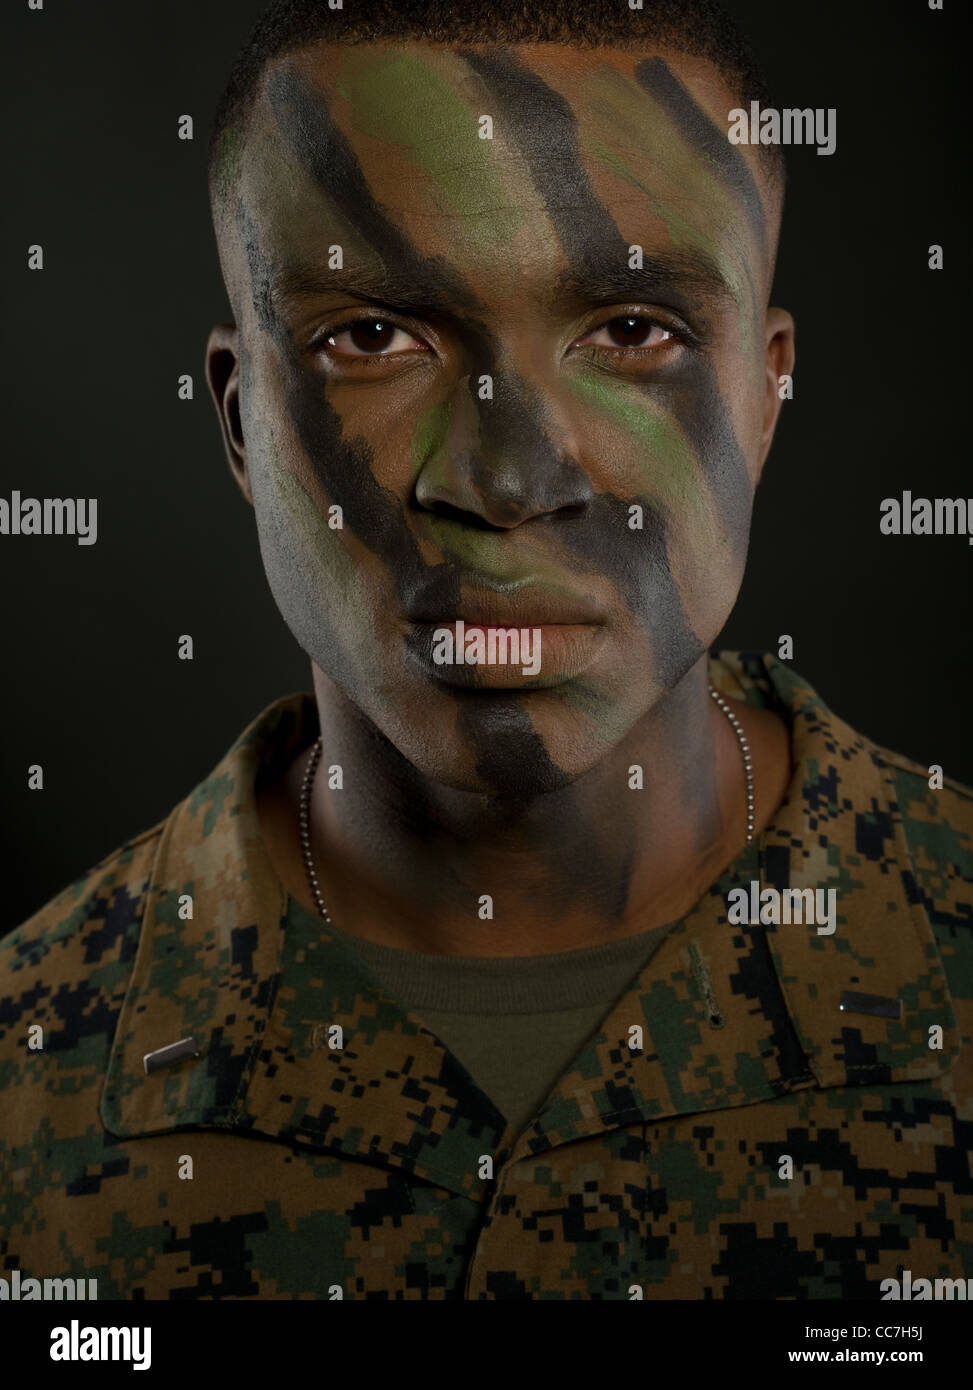 United States Marine Corps Officer In Marpat Digital Camouflage Stock